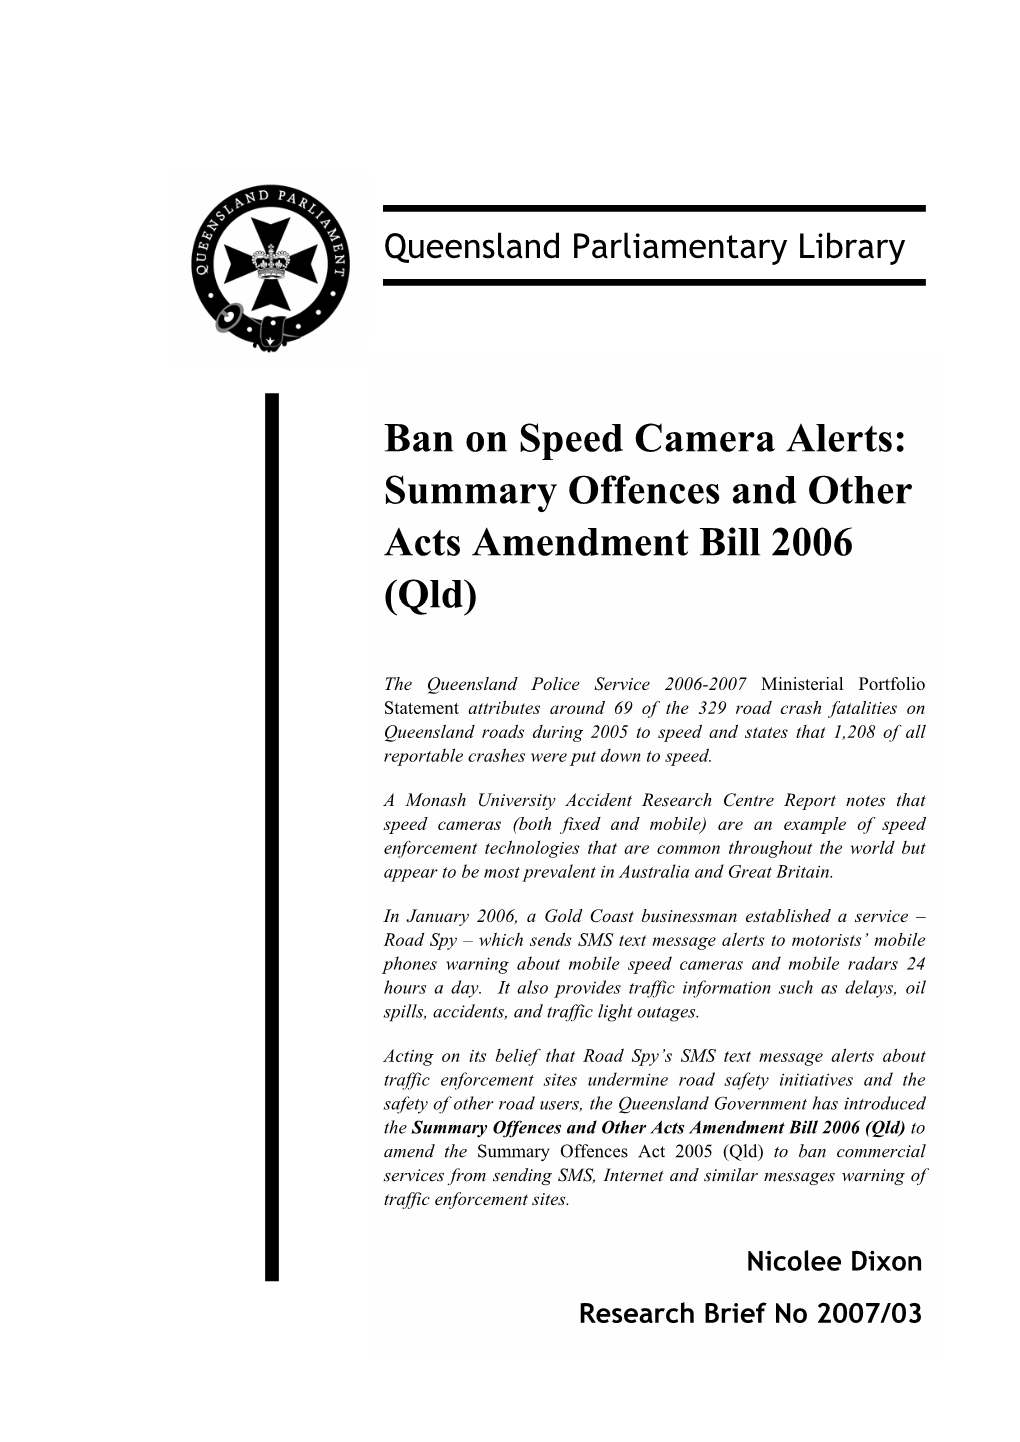 Summary Offences and Other Acts Amendment Bill 2006 (Qld)